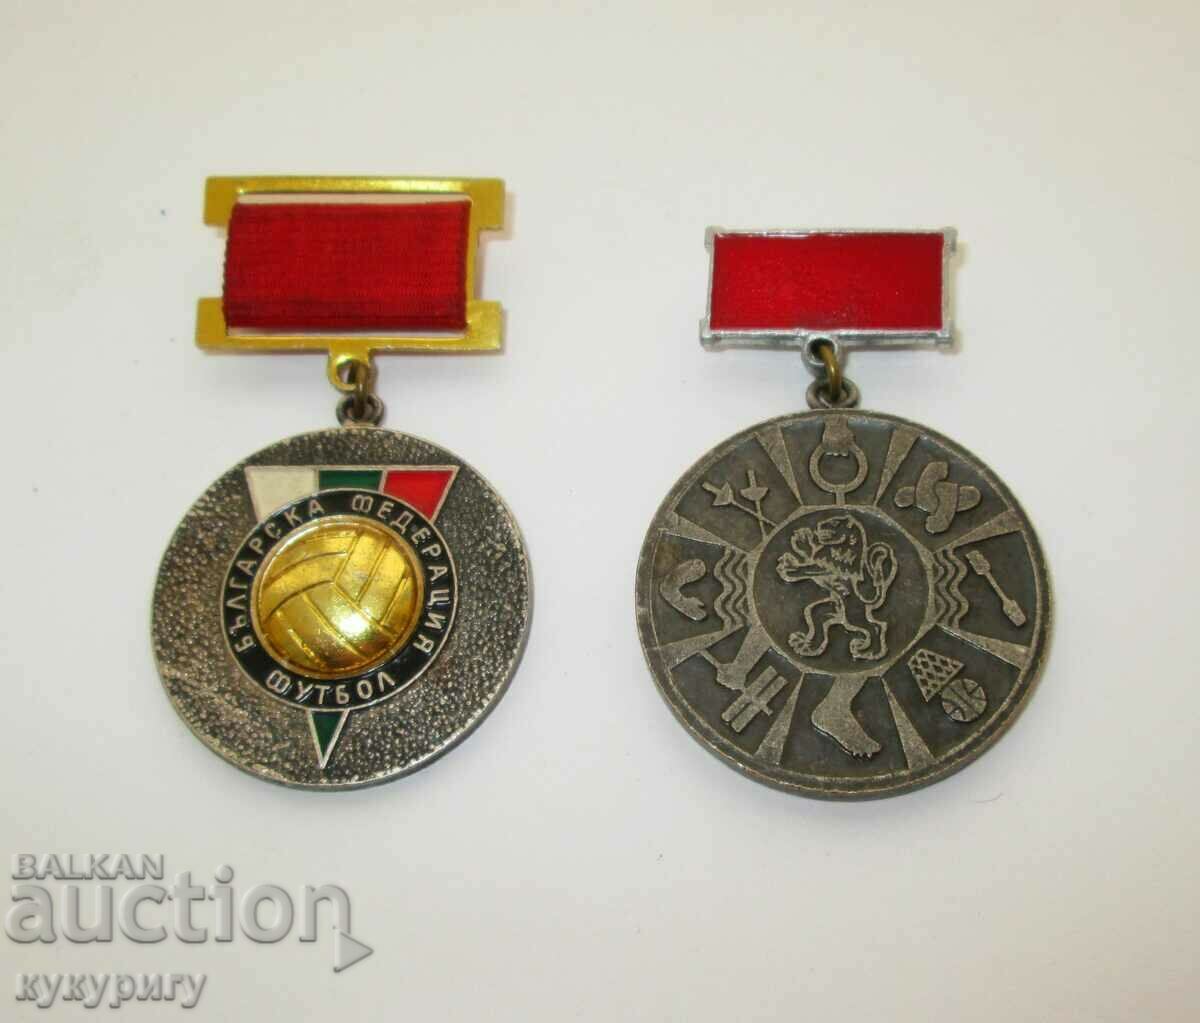 Two sports medal badges football for special merit